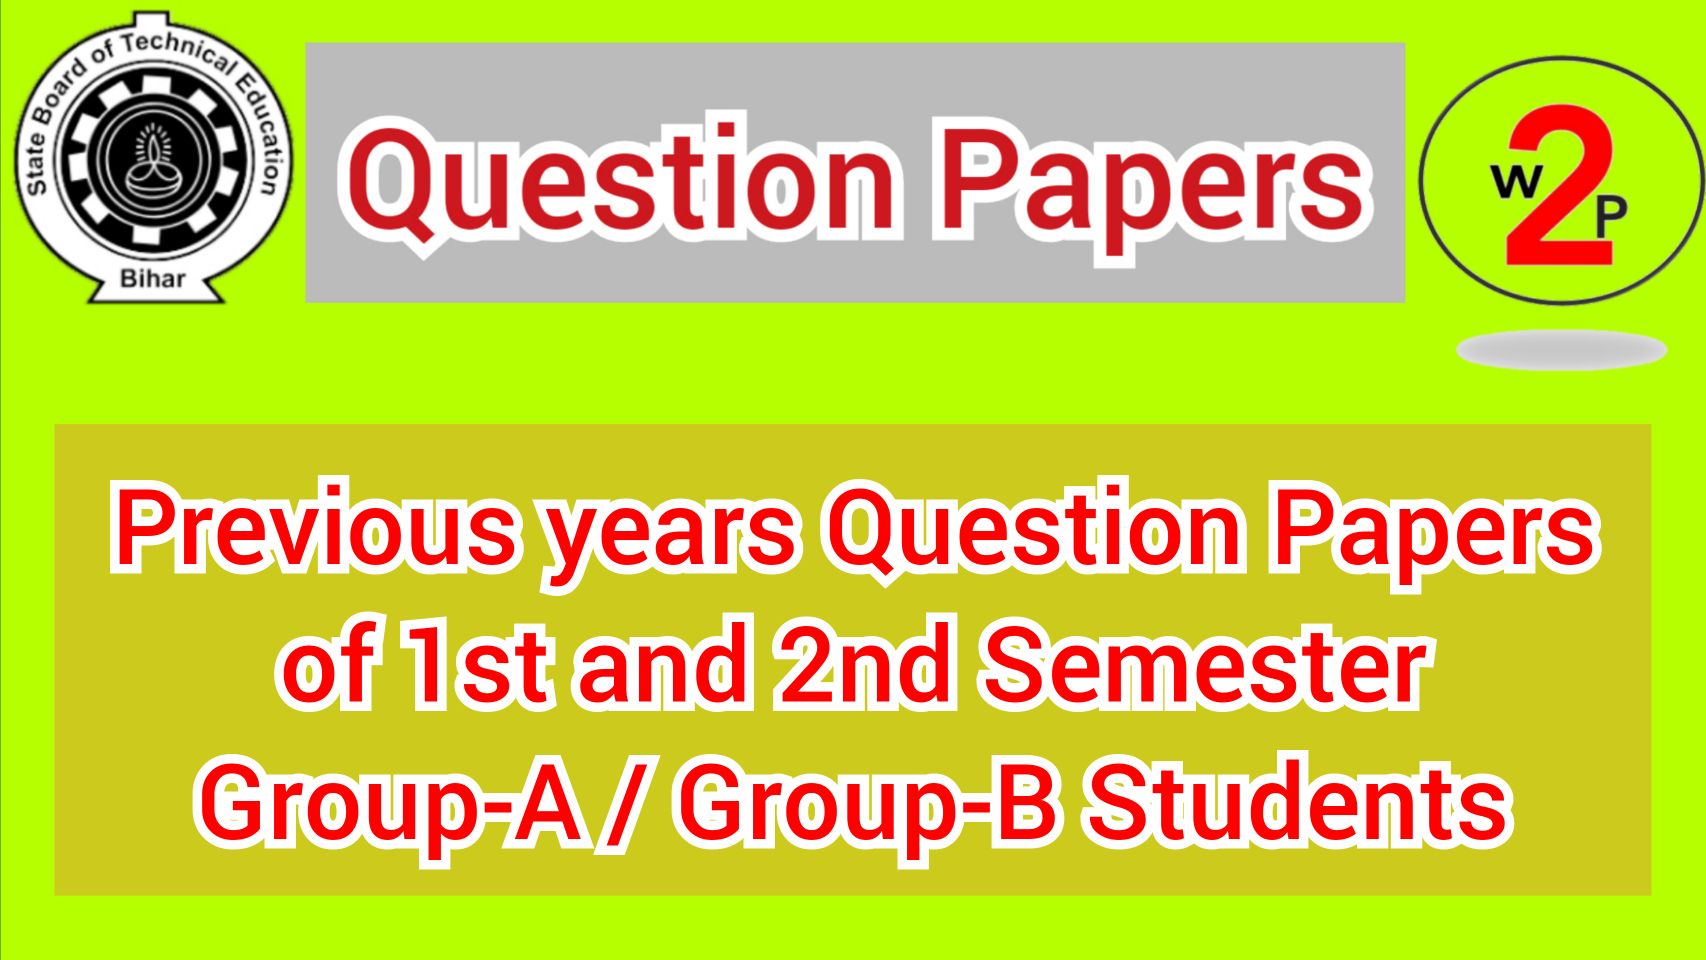 1st and 2nd semester question papers